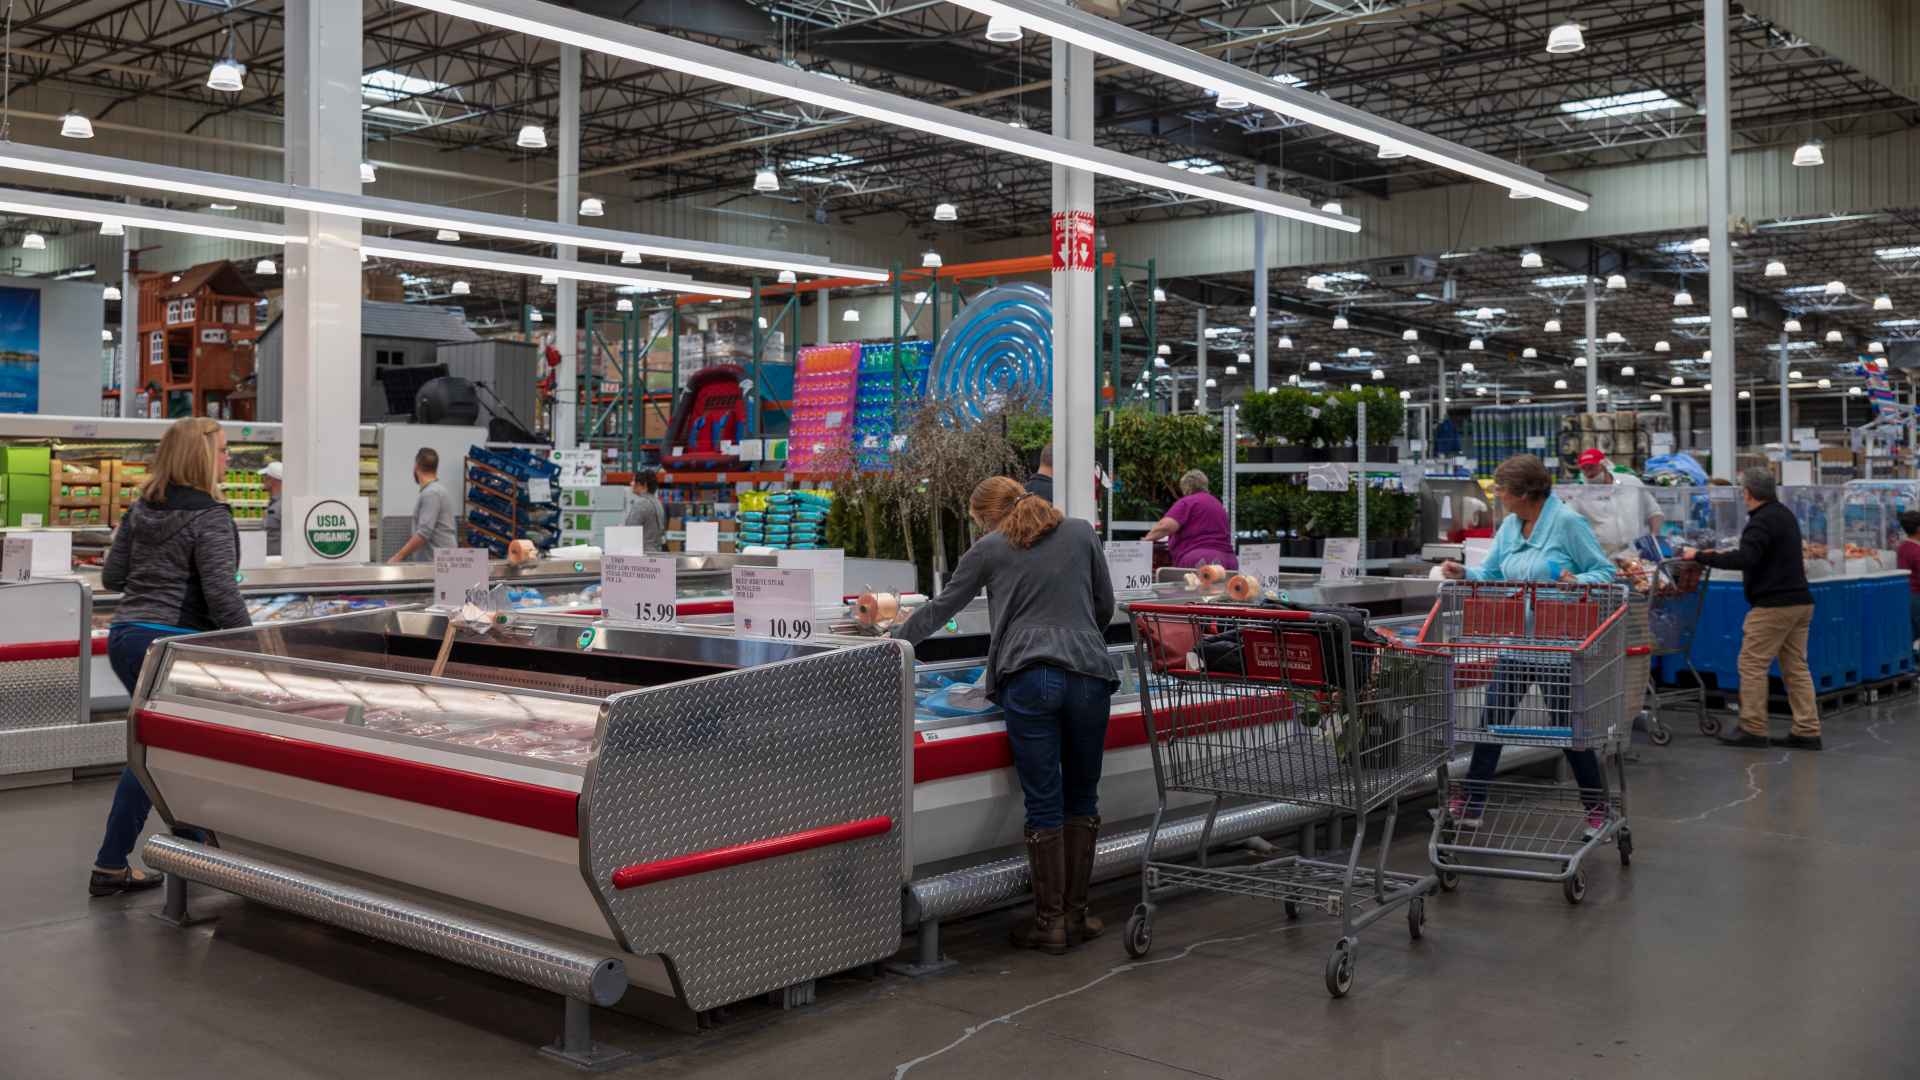 I’m a Chef: Here are 10 things I love to buy at Costco every month